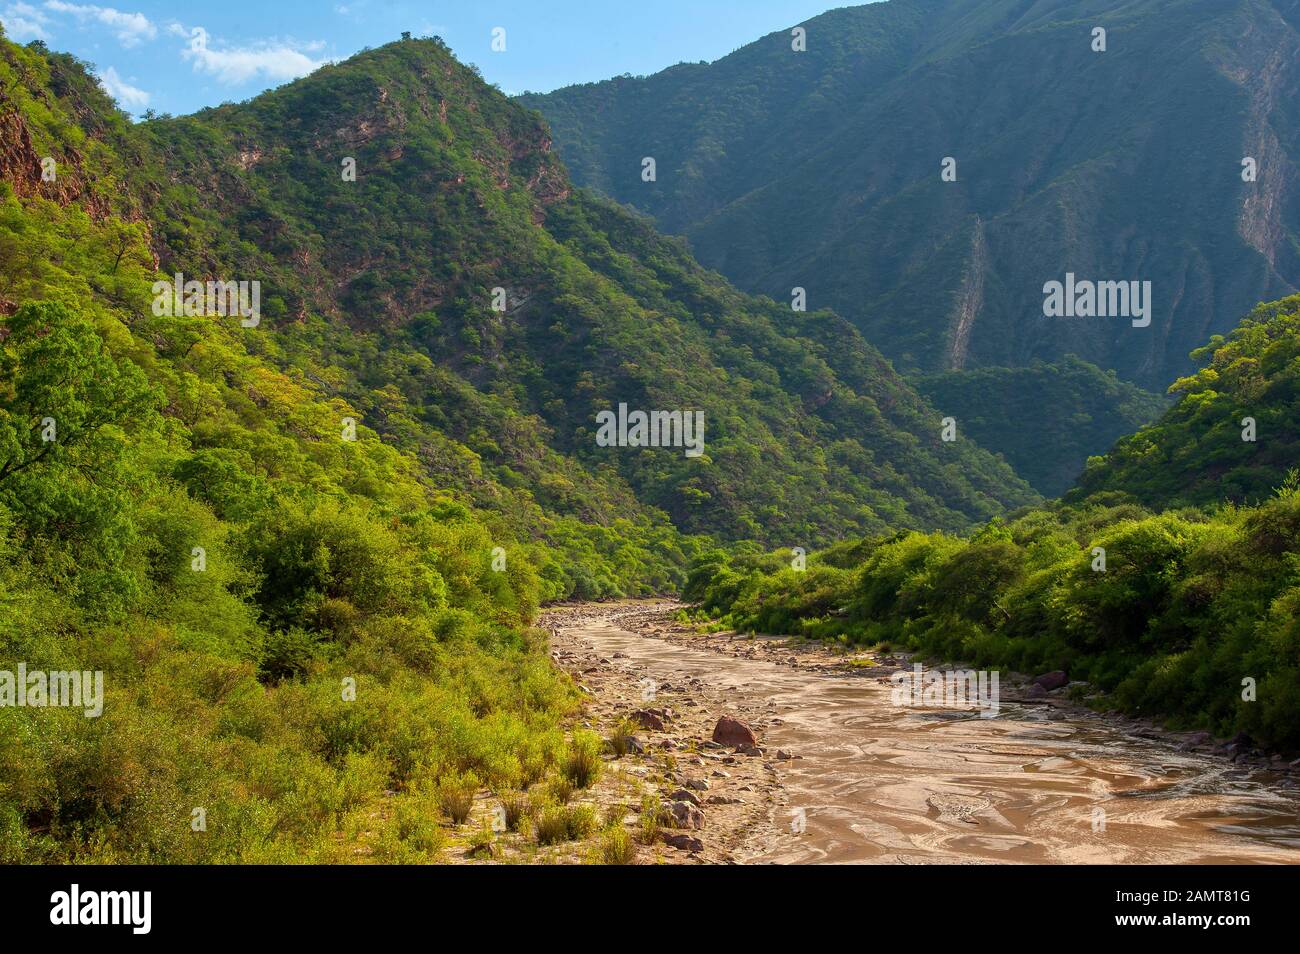 Beautiful scenery on the road from Salta to Cafayate, Las Conchas river,, green forest near Alemania, Argentina Stock Photo